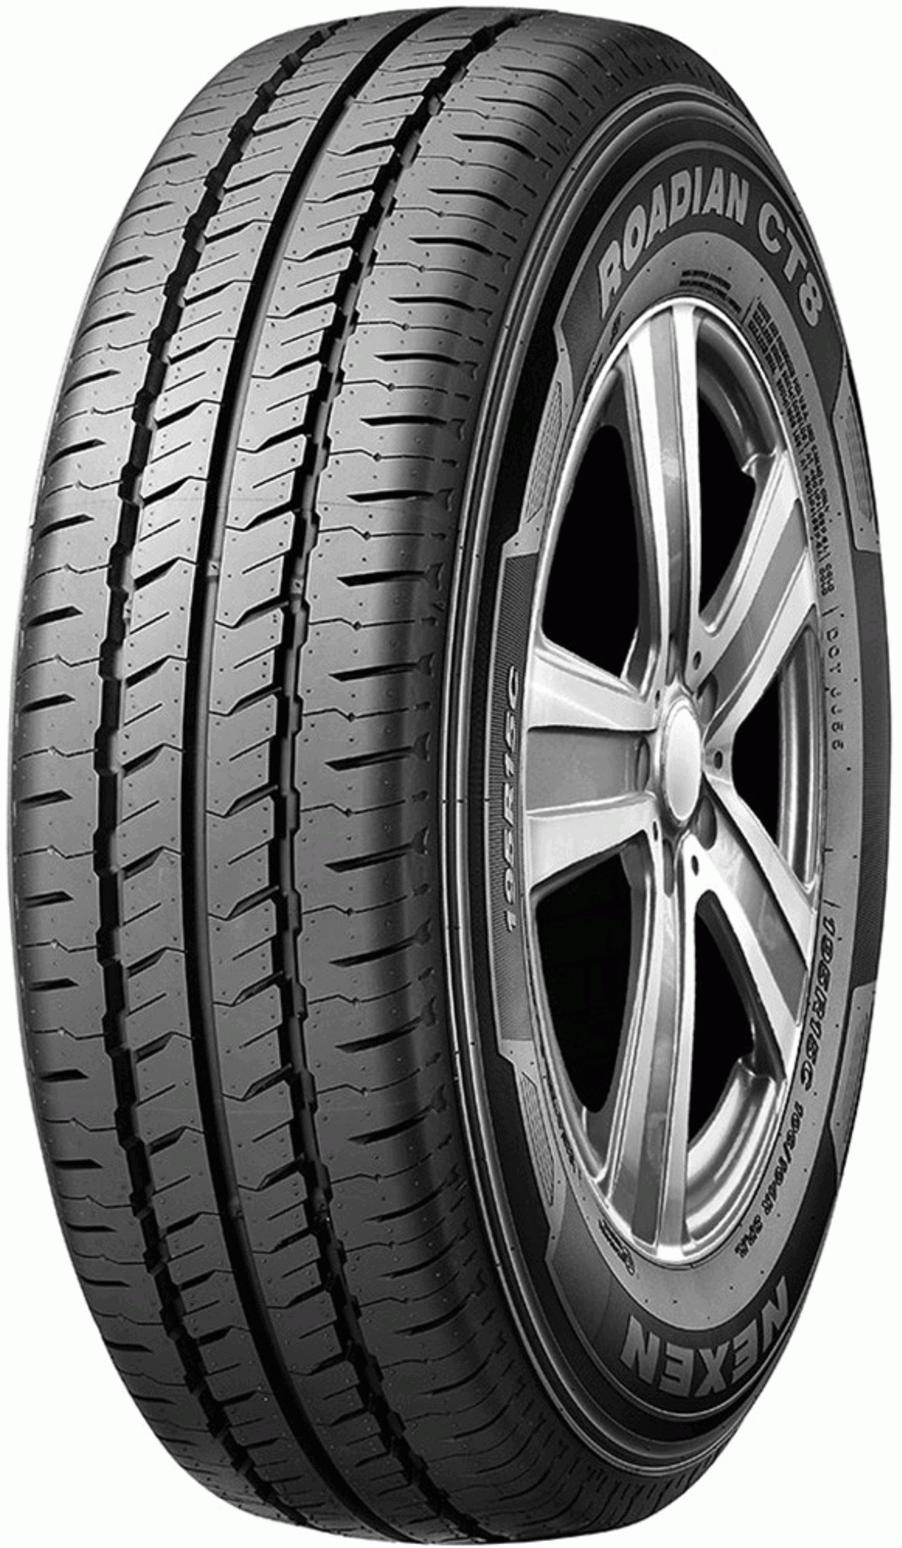 Roadian - CT8 Tests Tire Reviews and Nexen